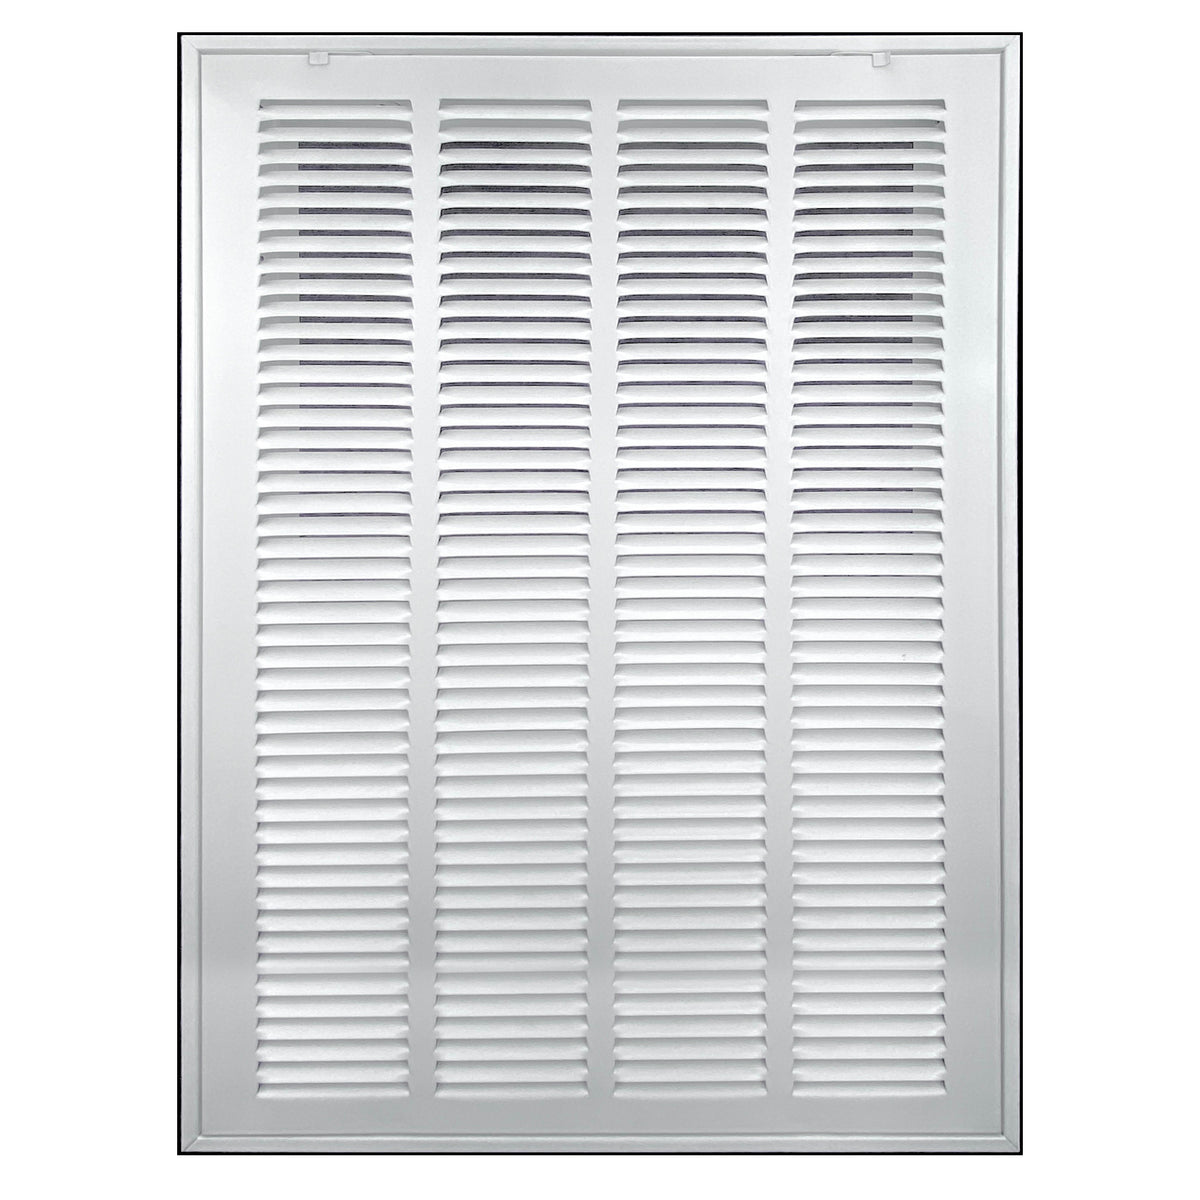 airgrilles 16" x 25" duct opening   hd steel return air filter grille for sidewall and ceiling 7hnd-rfg1-wh-16x25 038775638357 - 1